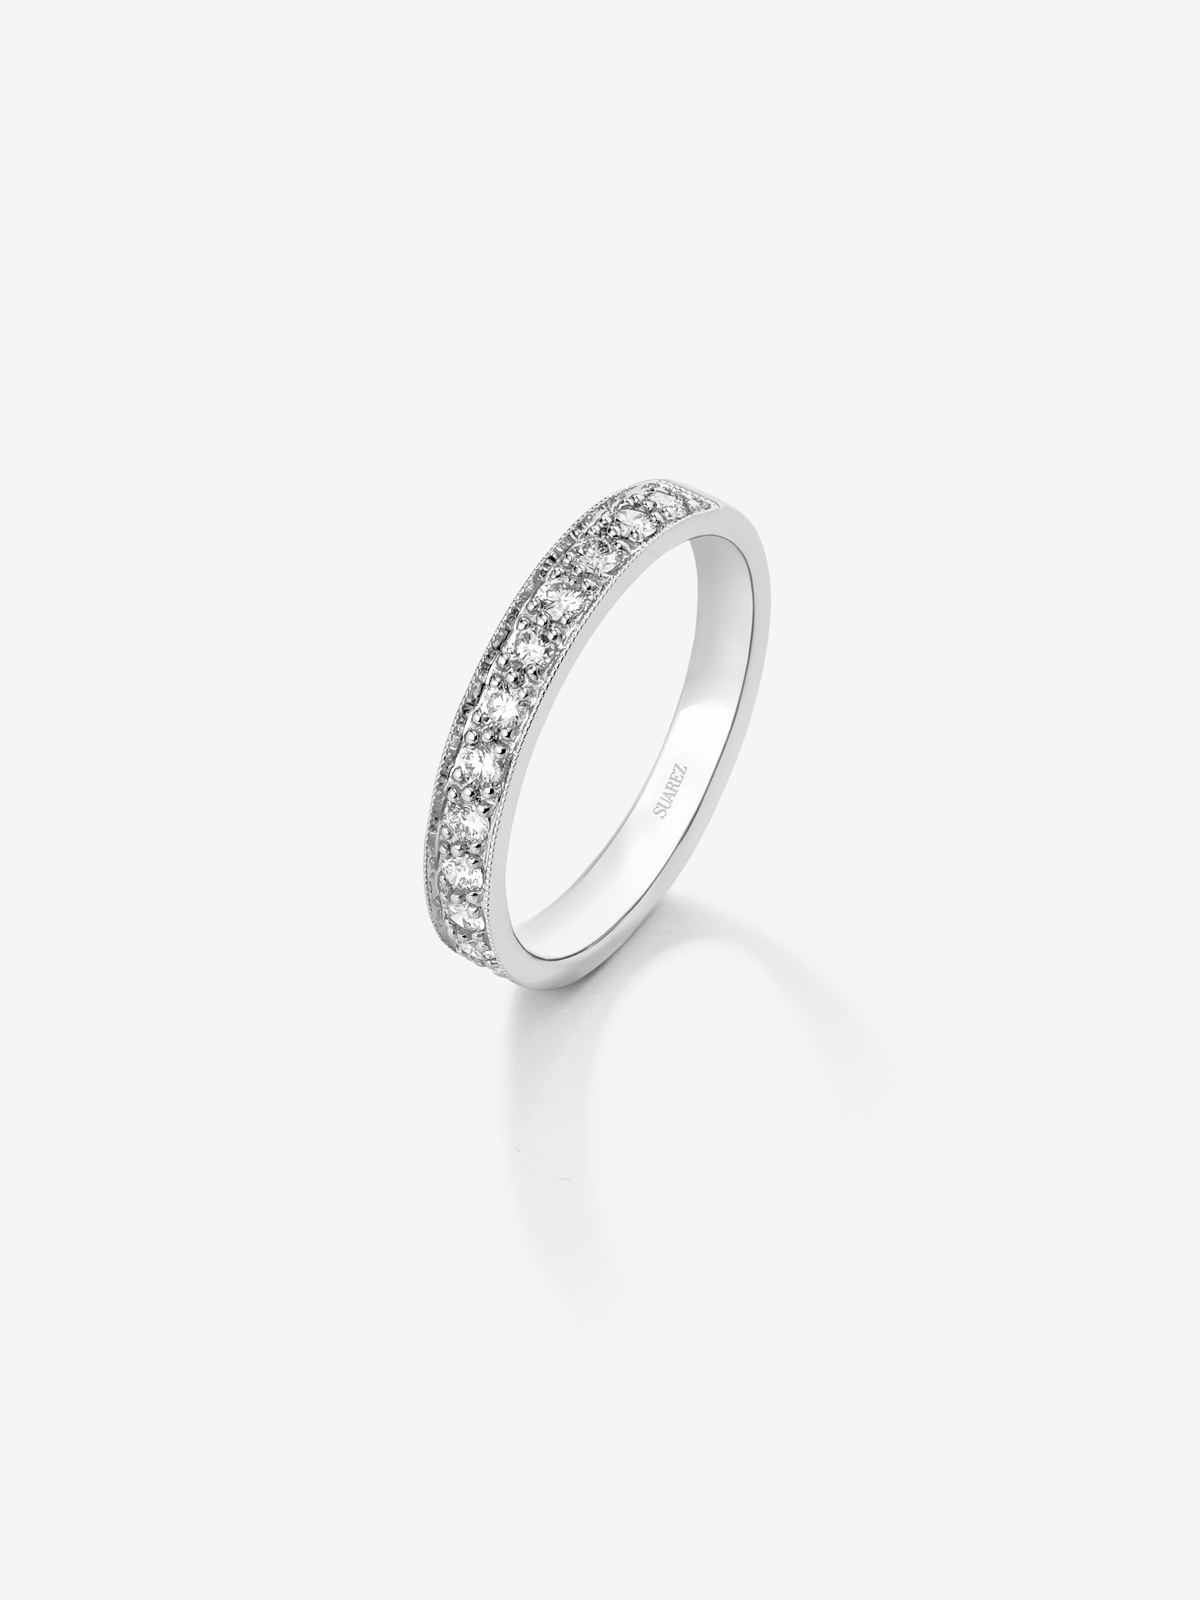 18K White Gold Half Eternity Engagement Ring with 0.38ct Diamond Band.